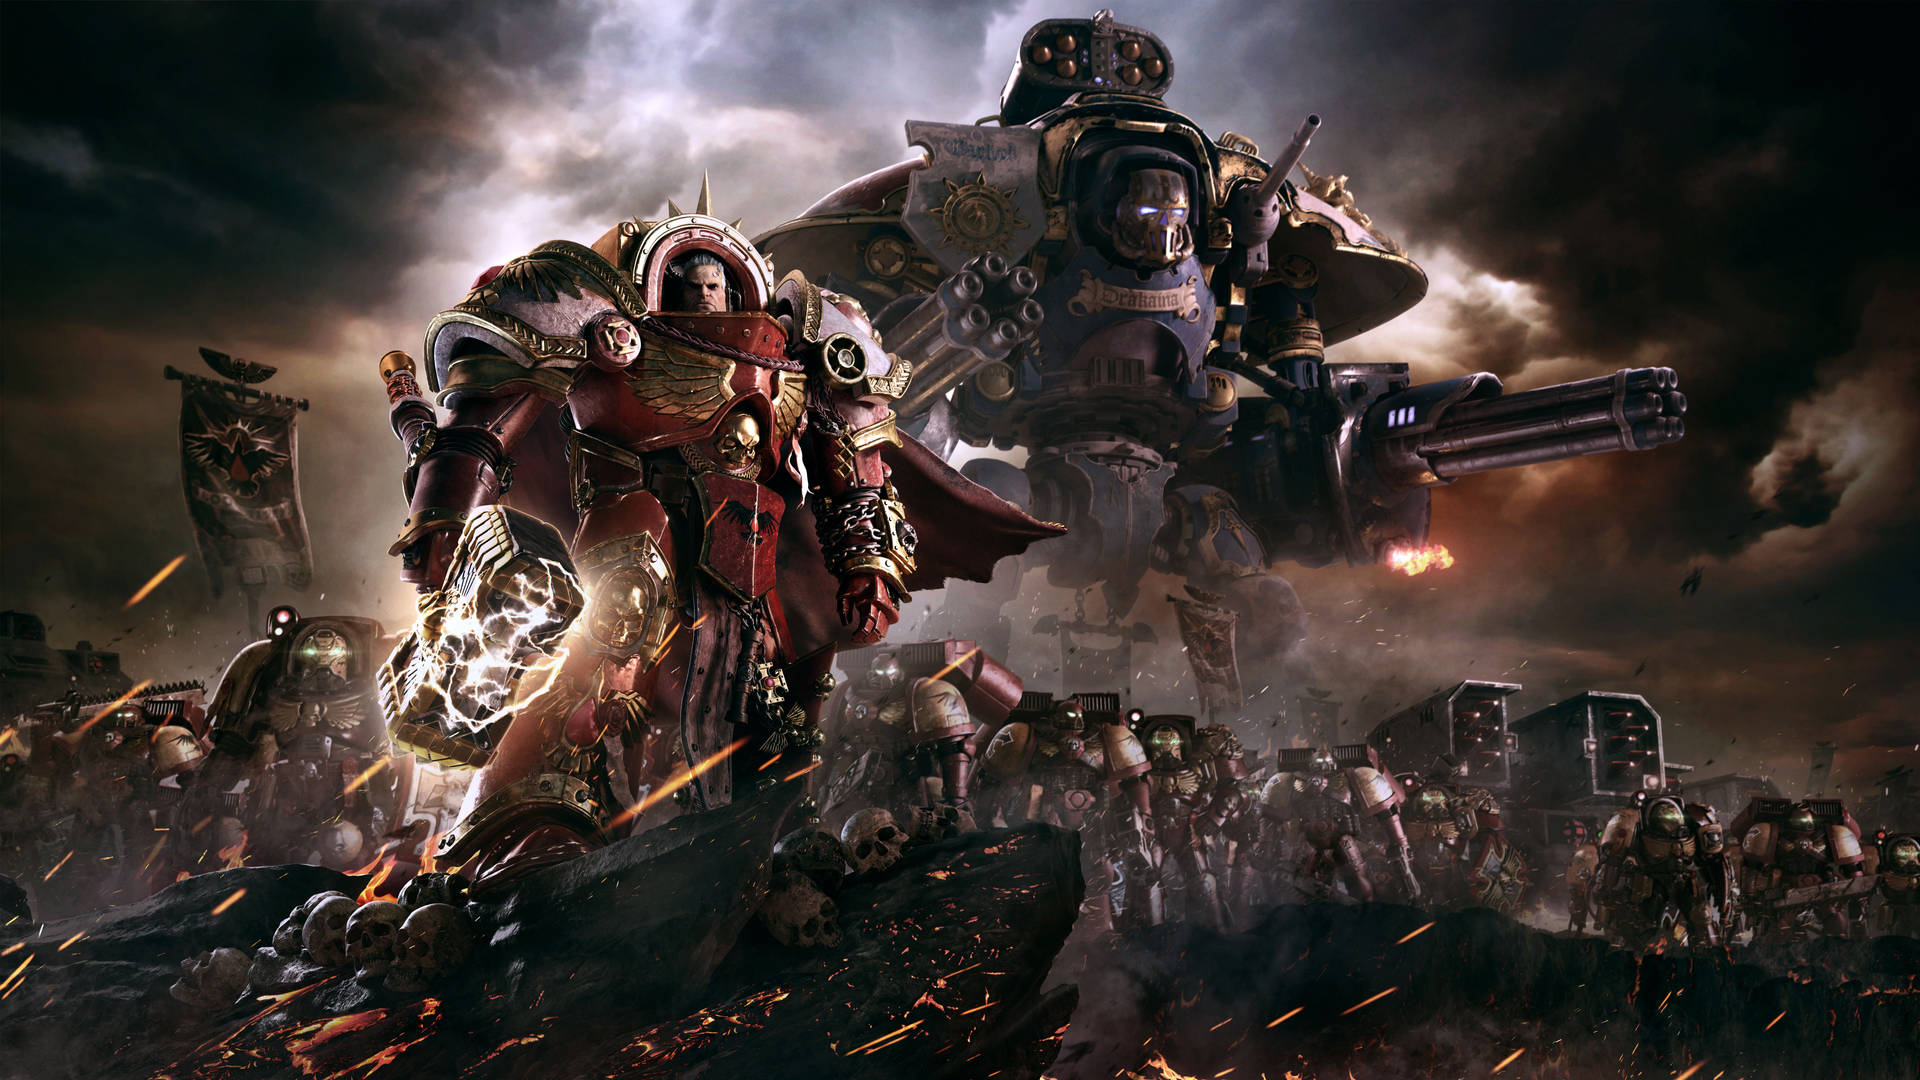 Epic Battle Scene from Warhammer's Forces of Order Wallpaper